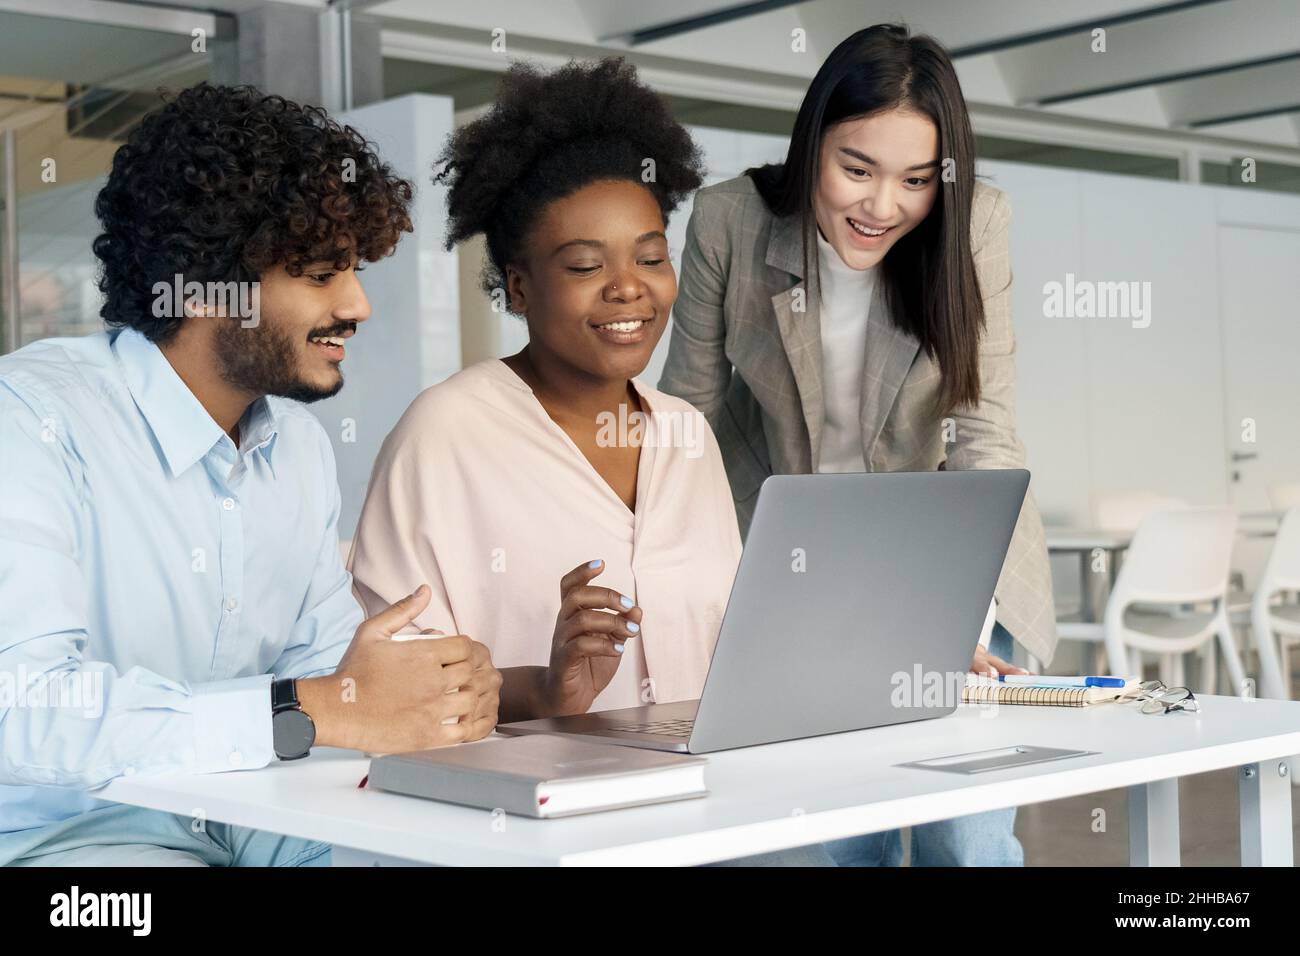 Student diverse people group working or learning together using laptop Stock Photo